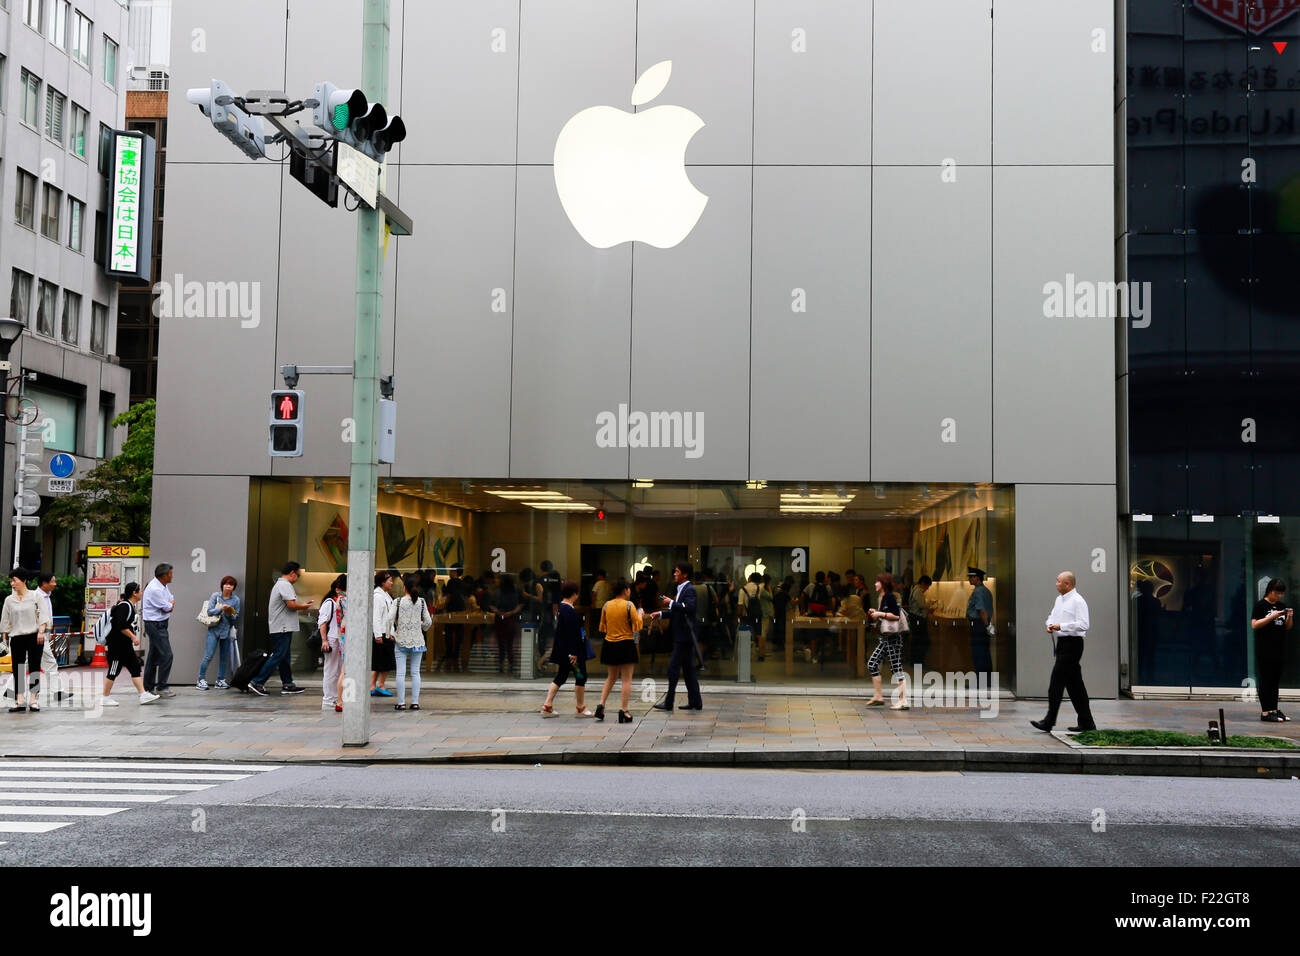 Pedestrians walk past the Apple Store in Ginza on September 10, 2015, Tokyo, Japan. Even after Apple CEO Tim Cook announced their new products iPad Pro, iPhone 6s, iPhone 6s Plus and Apple TV on September 9, 2015, hardcore Japanese fans were nowhere to be seen outside the principal stores in Ginza and Omotesando. This could be because of heavy rain that hit Japan this week caused by typhoon Etau, or perhaps Apple fans are now less excited by this clockwork new release cycle. In Australia the media already reported that the first Apple fan had set up a tent in front of the store in Sydney. (Pho Stock Photo